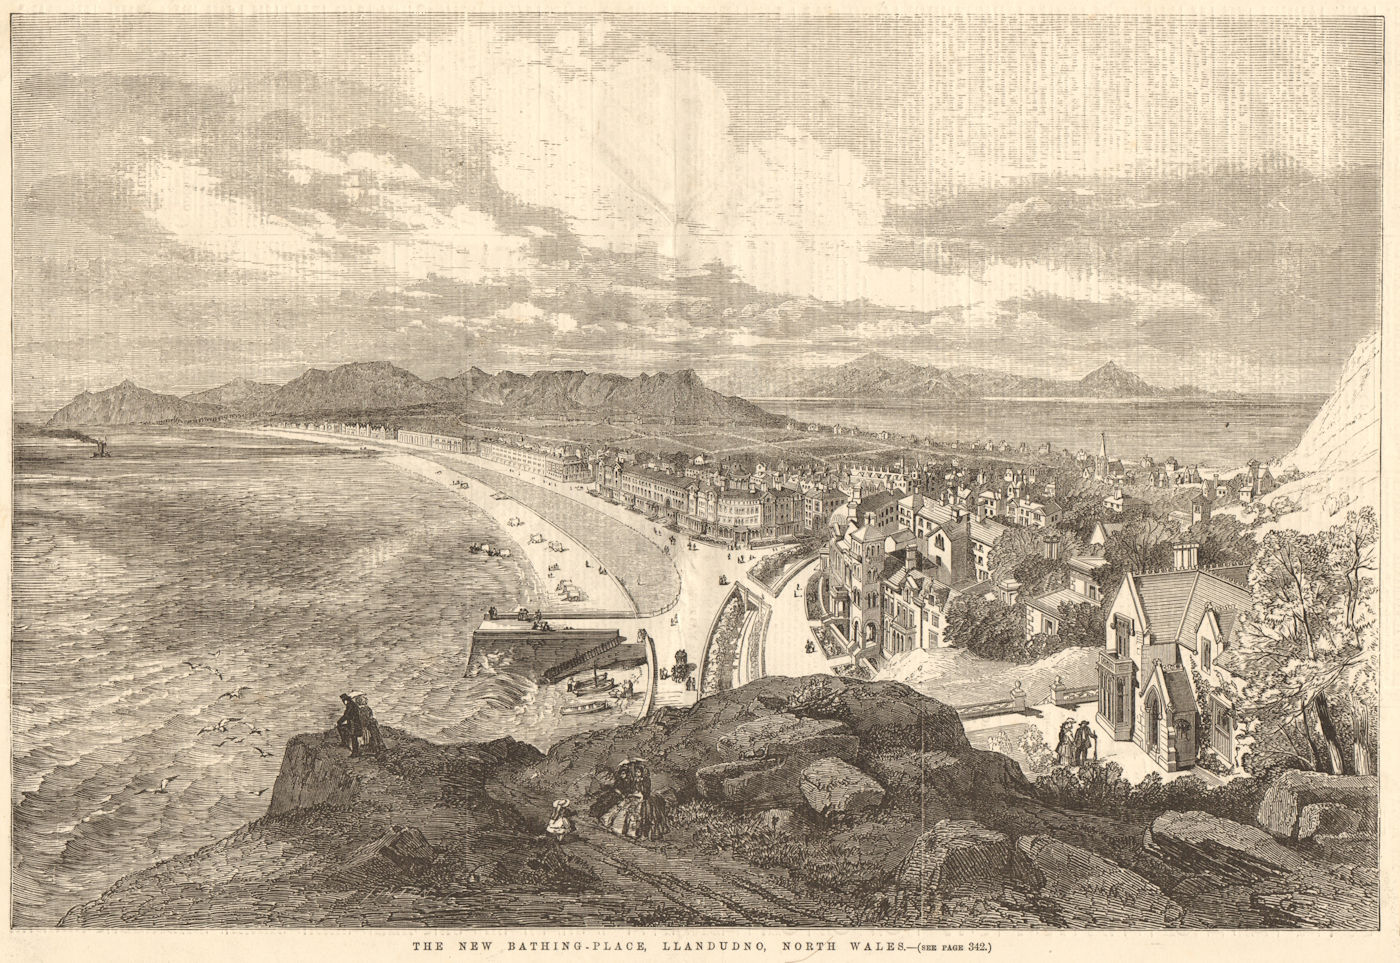 Associate Product The new bathing-place, Llandudno, North Wales 1855 antique ILN full page print